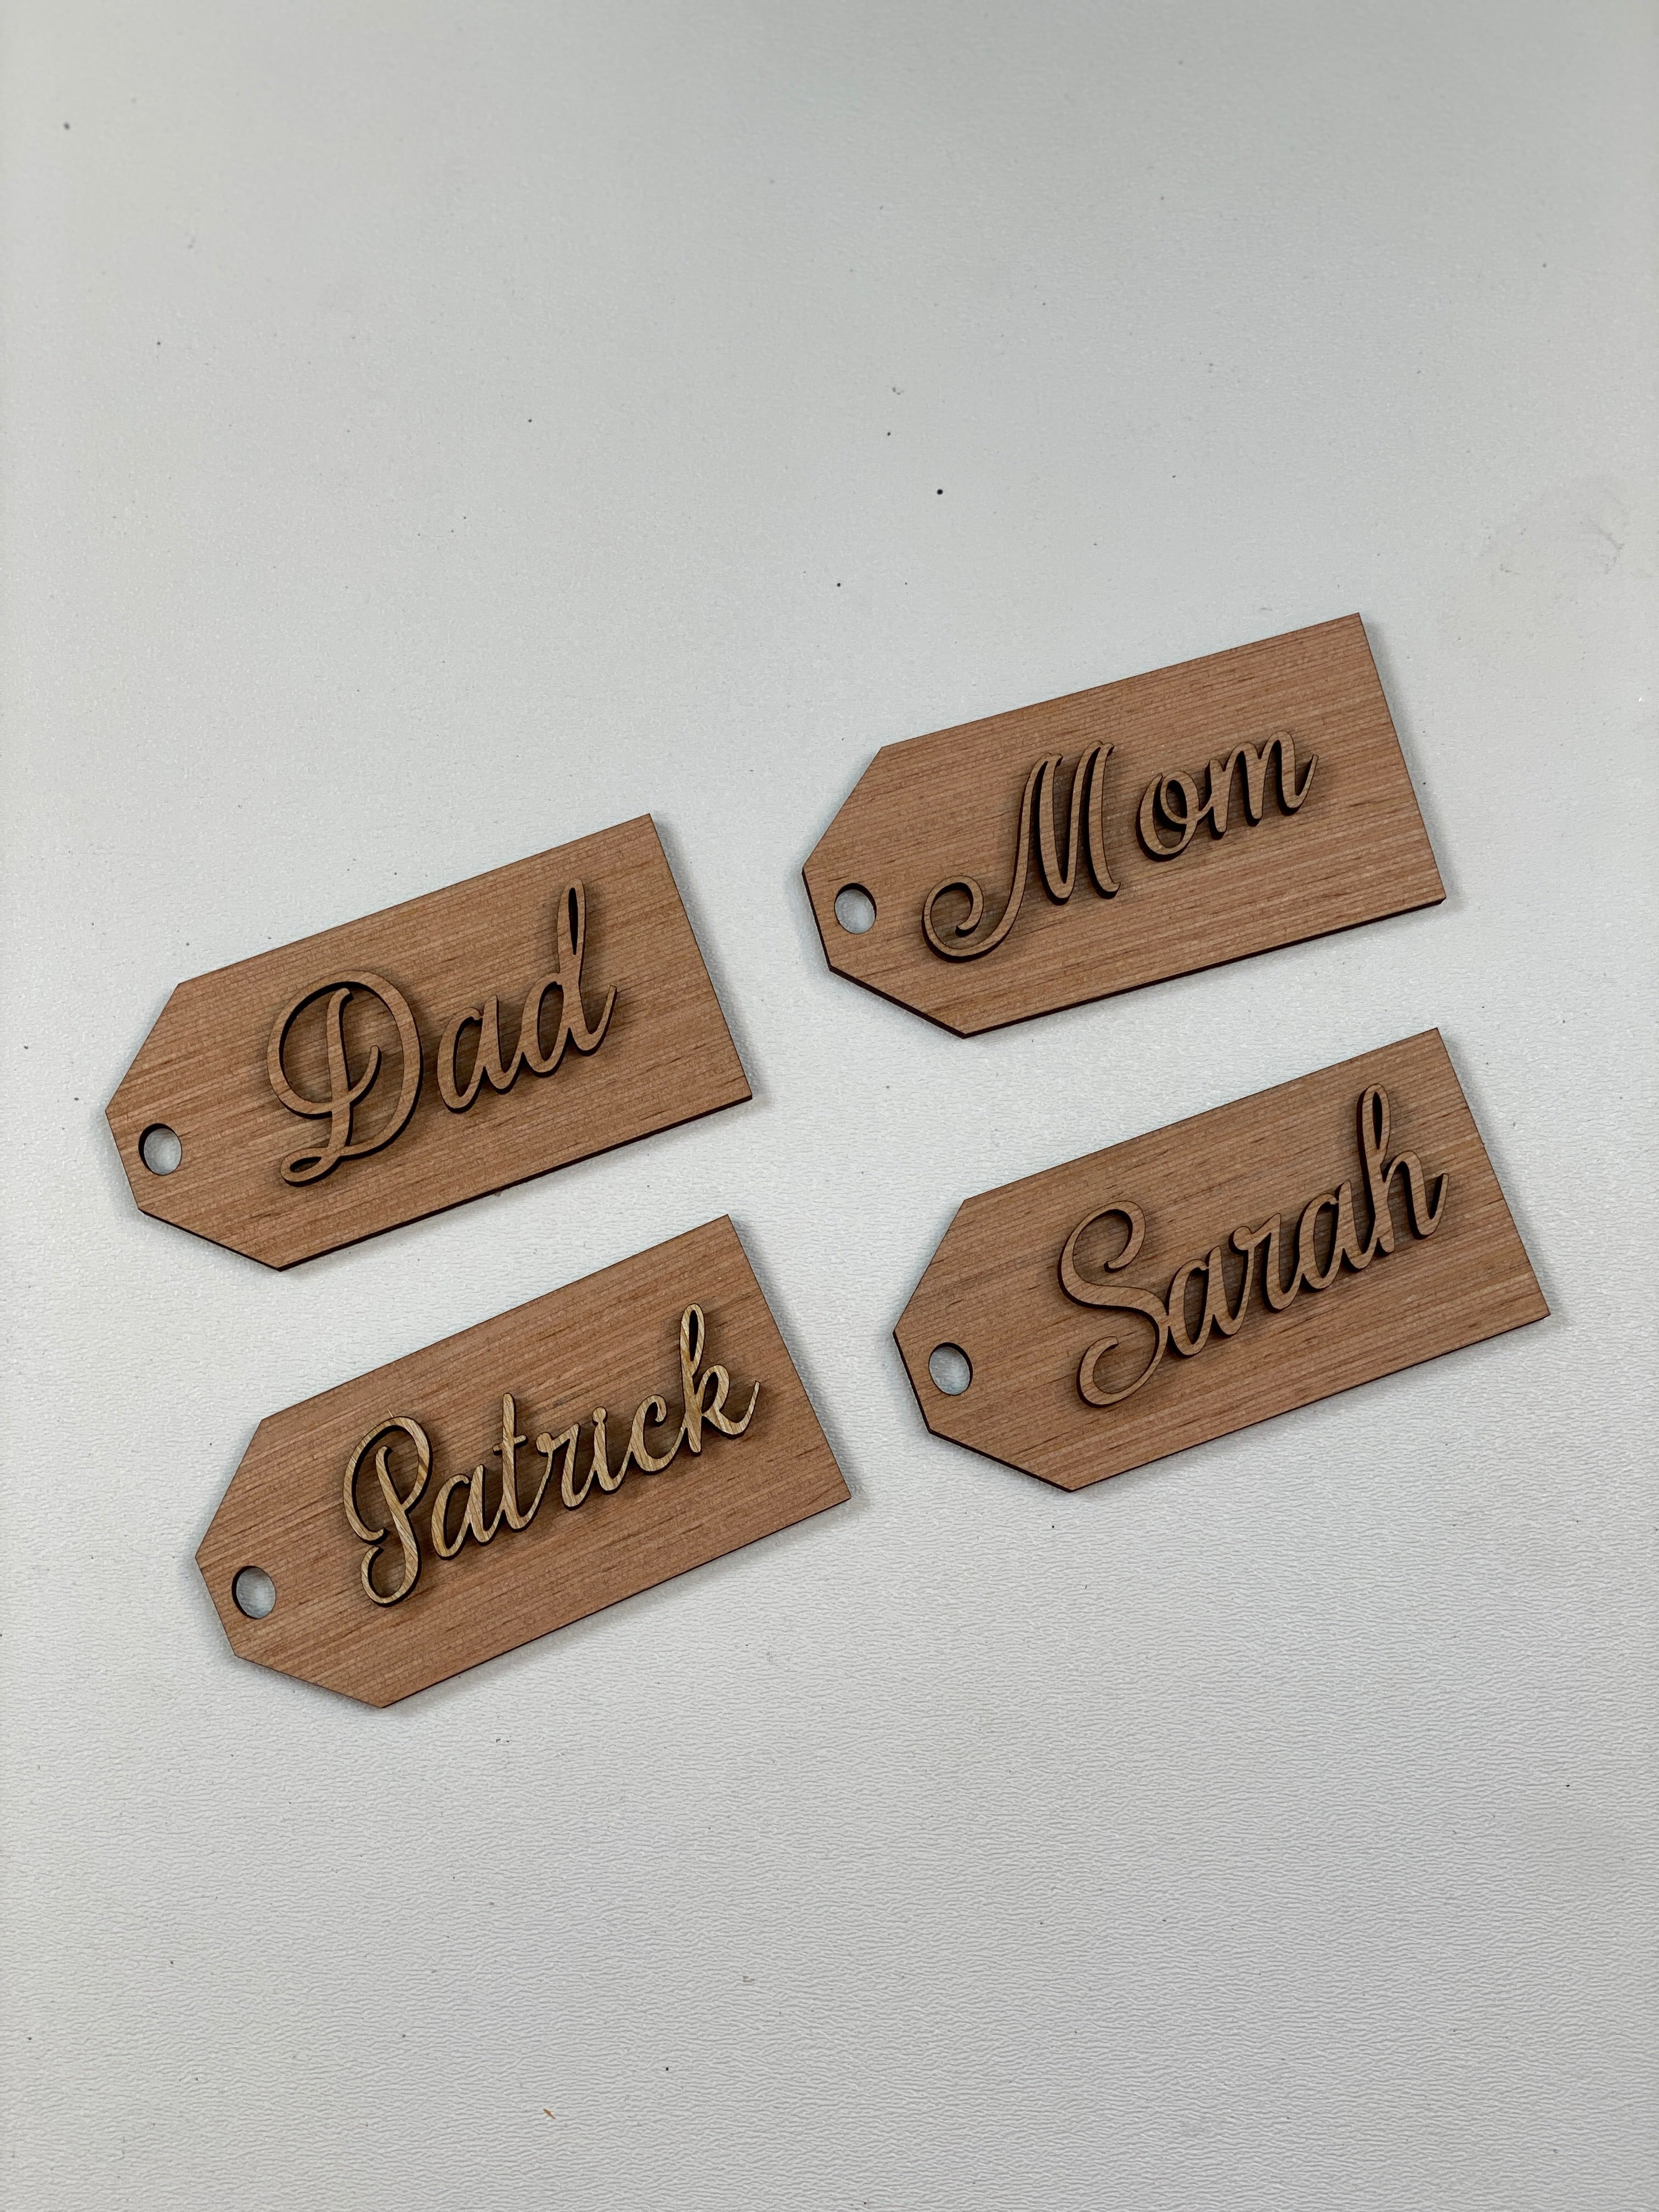 Stocking tags – Beyond Laser Creations